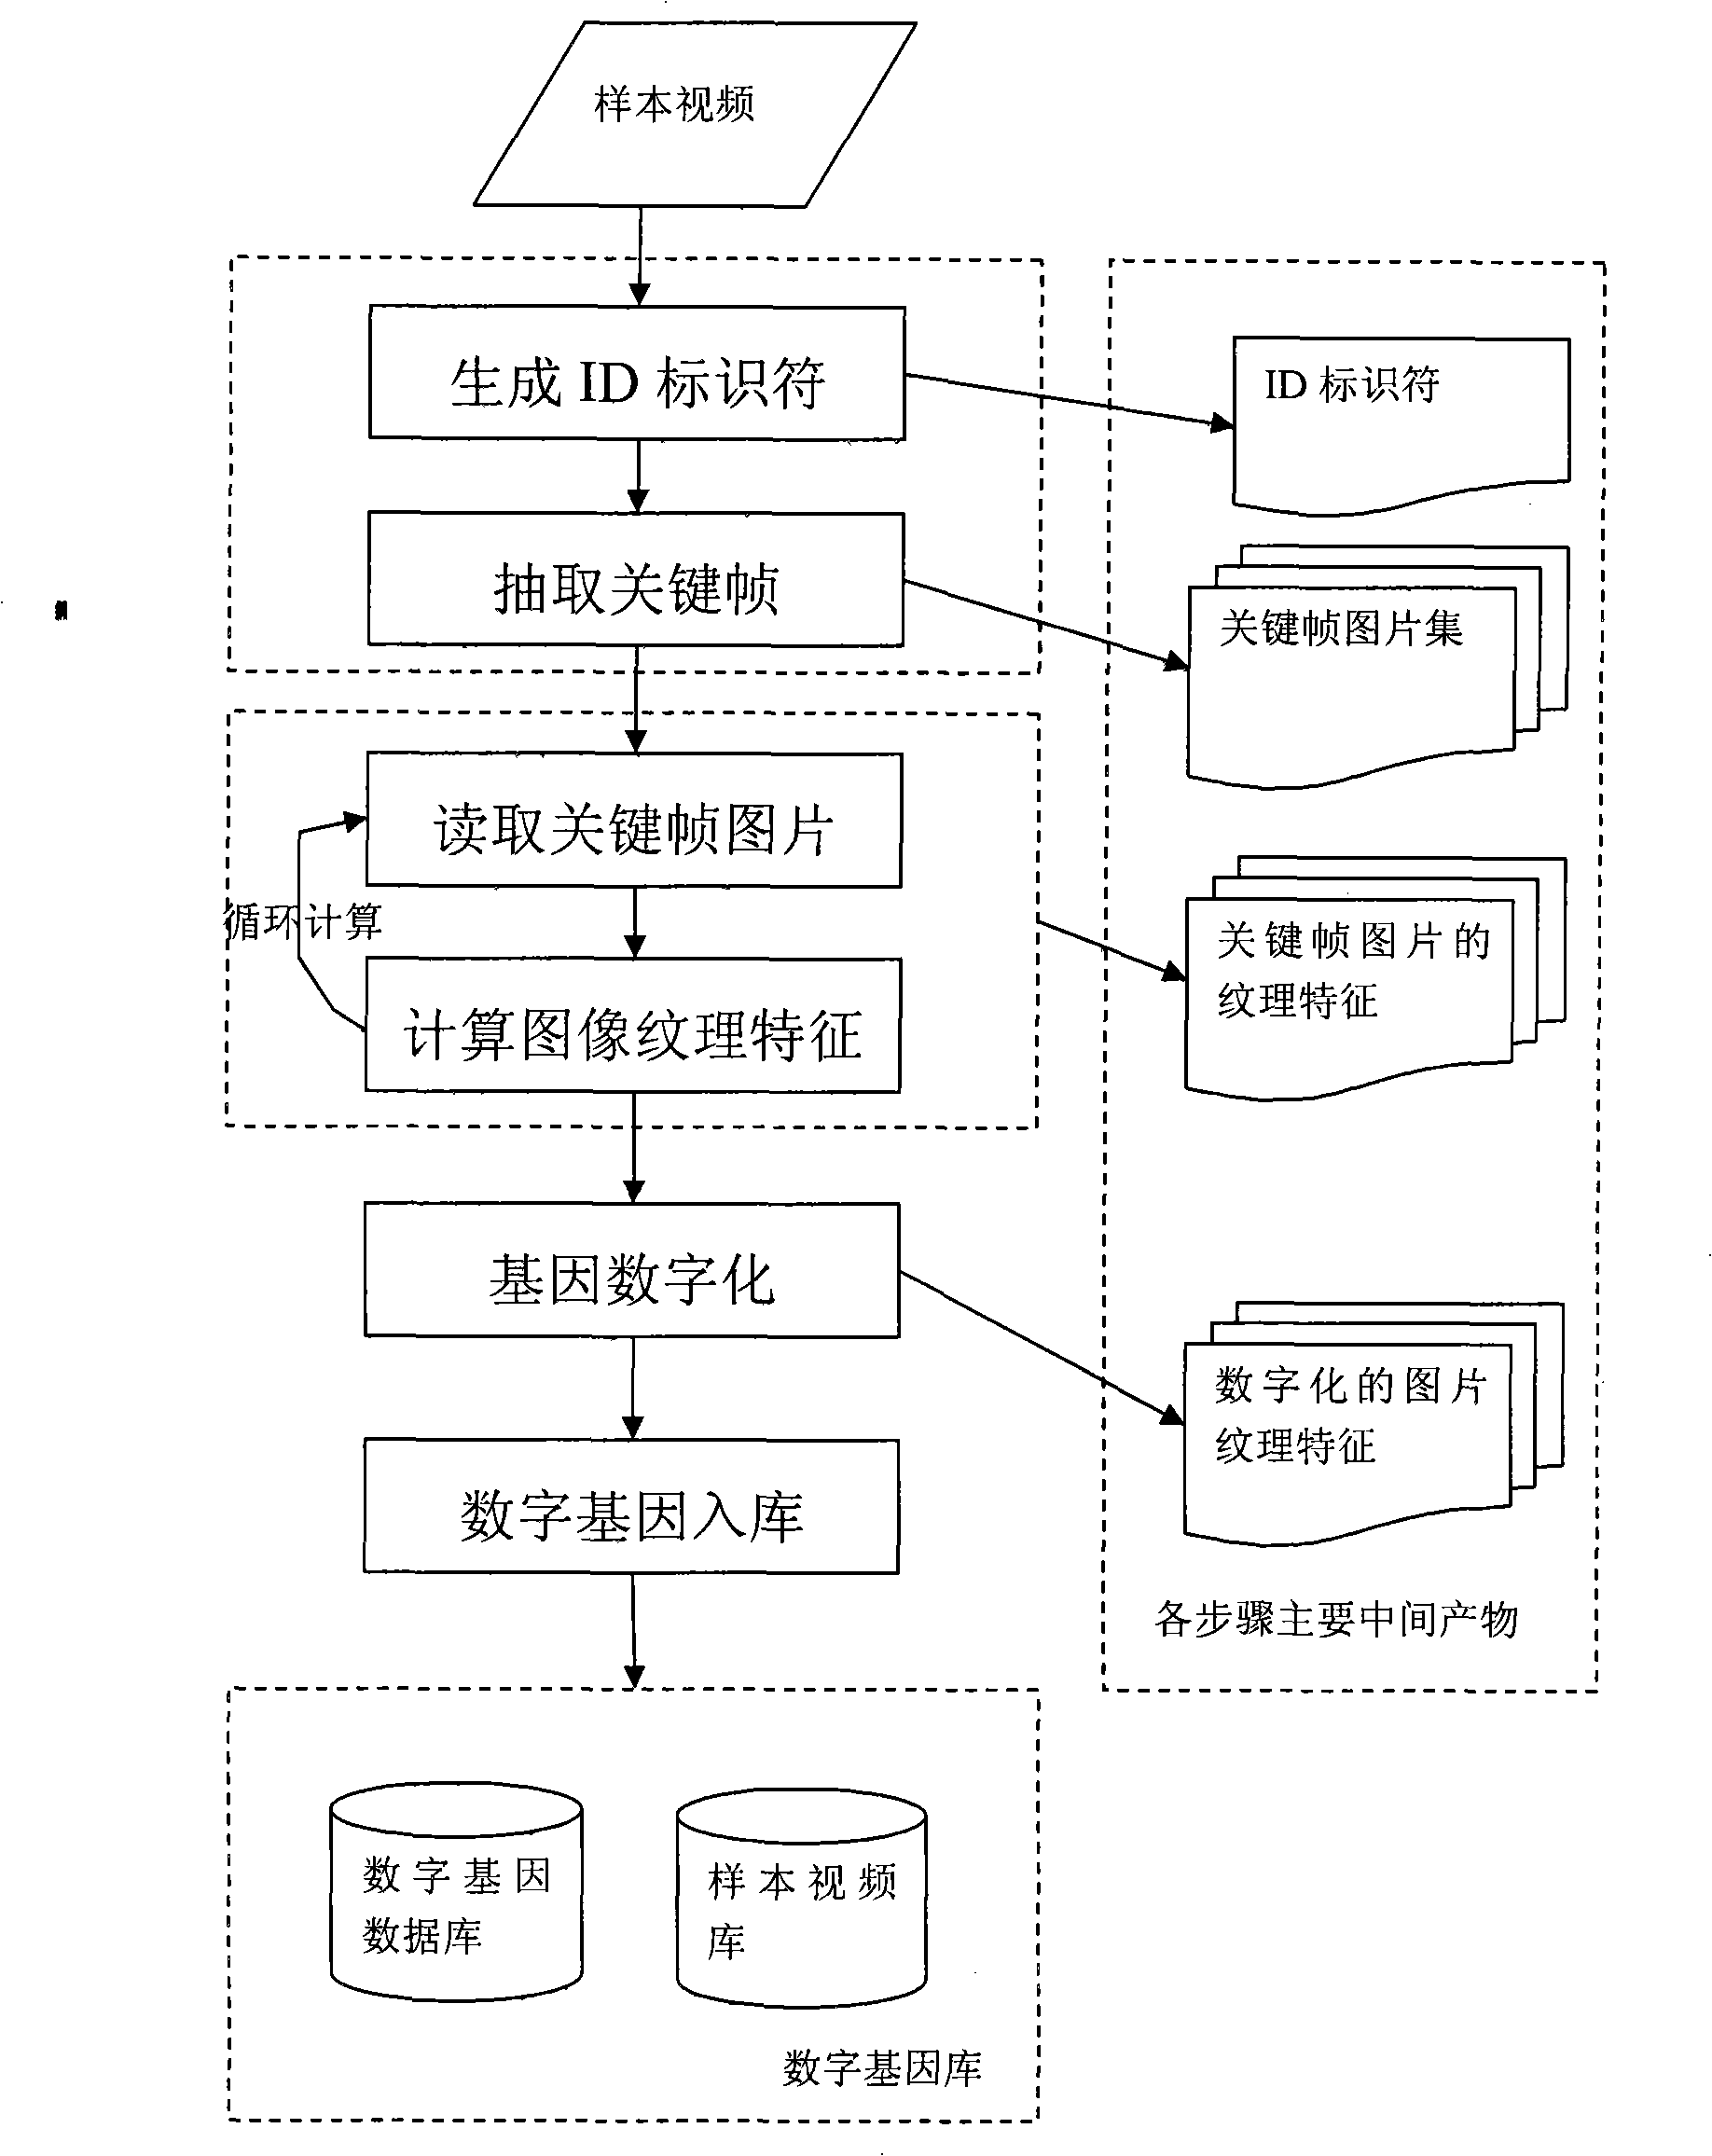 Method for auditing safety of internet video